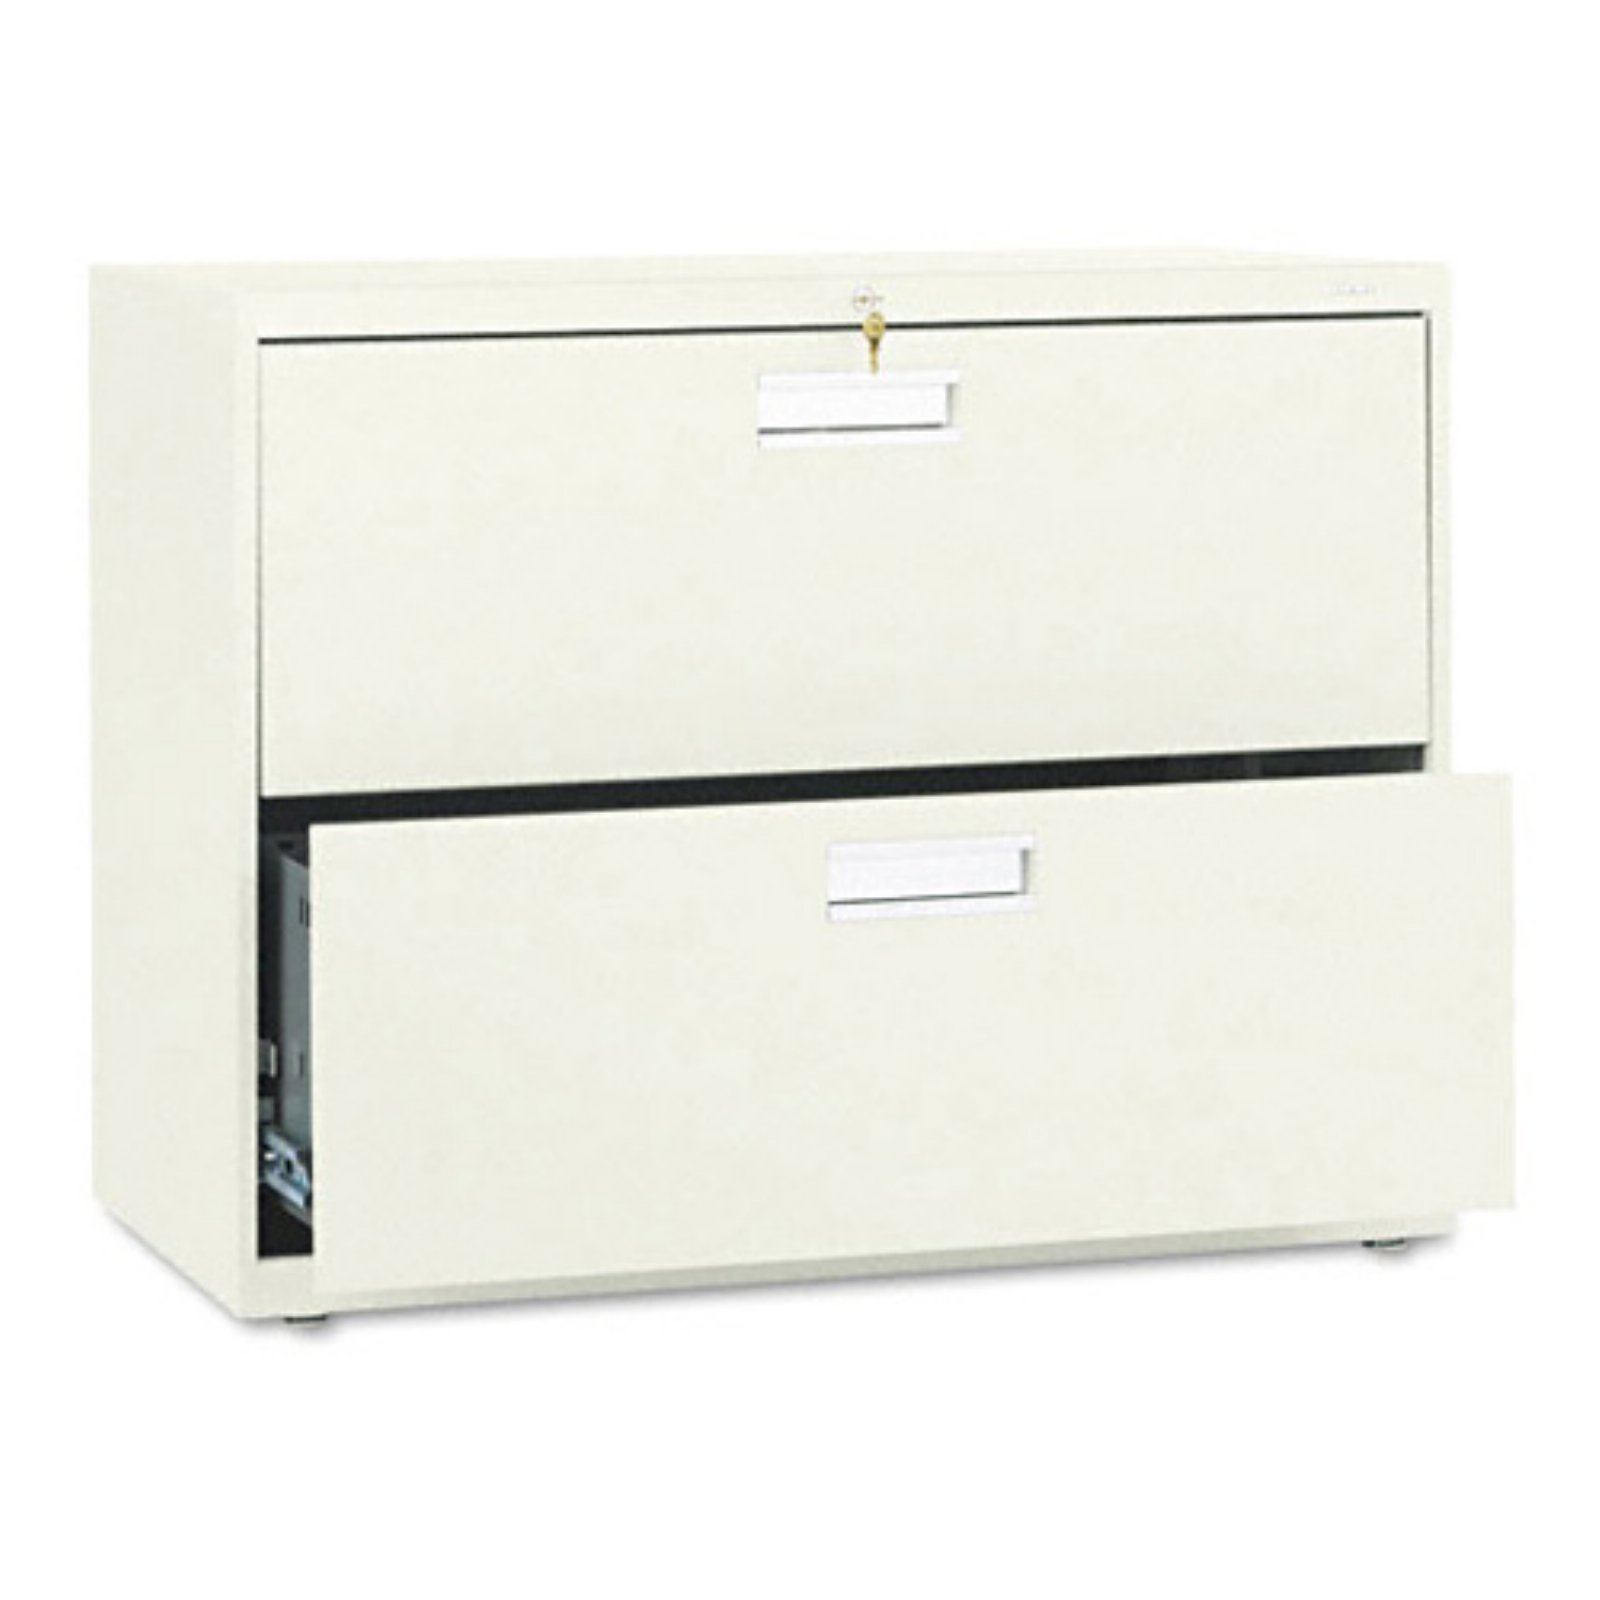 HON 2 Drawers Lateral Lockable Filing Cabinet, Putty - image 2 of 2